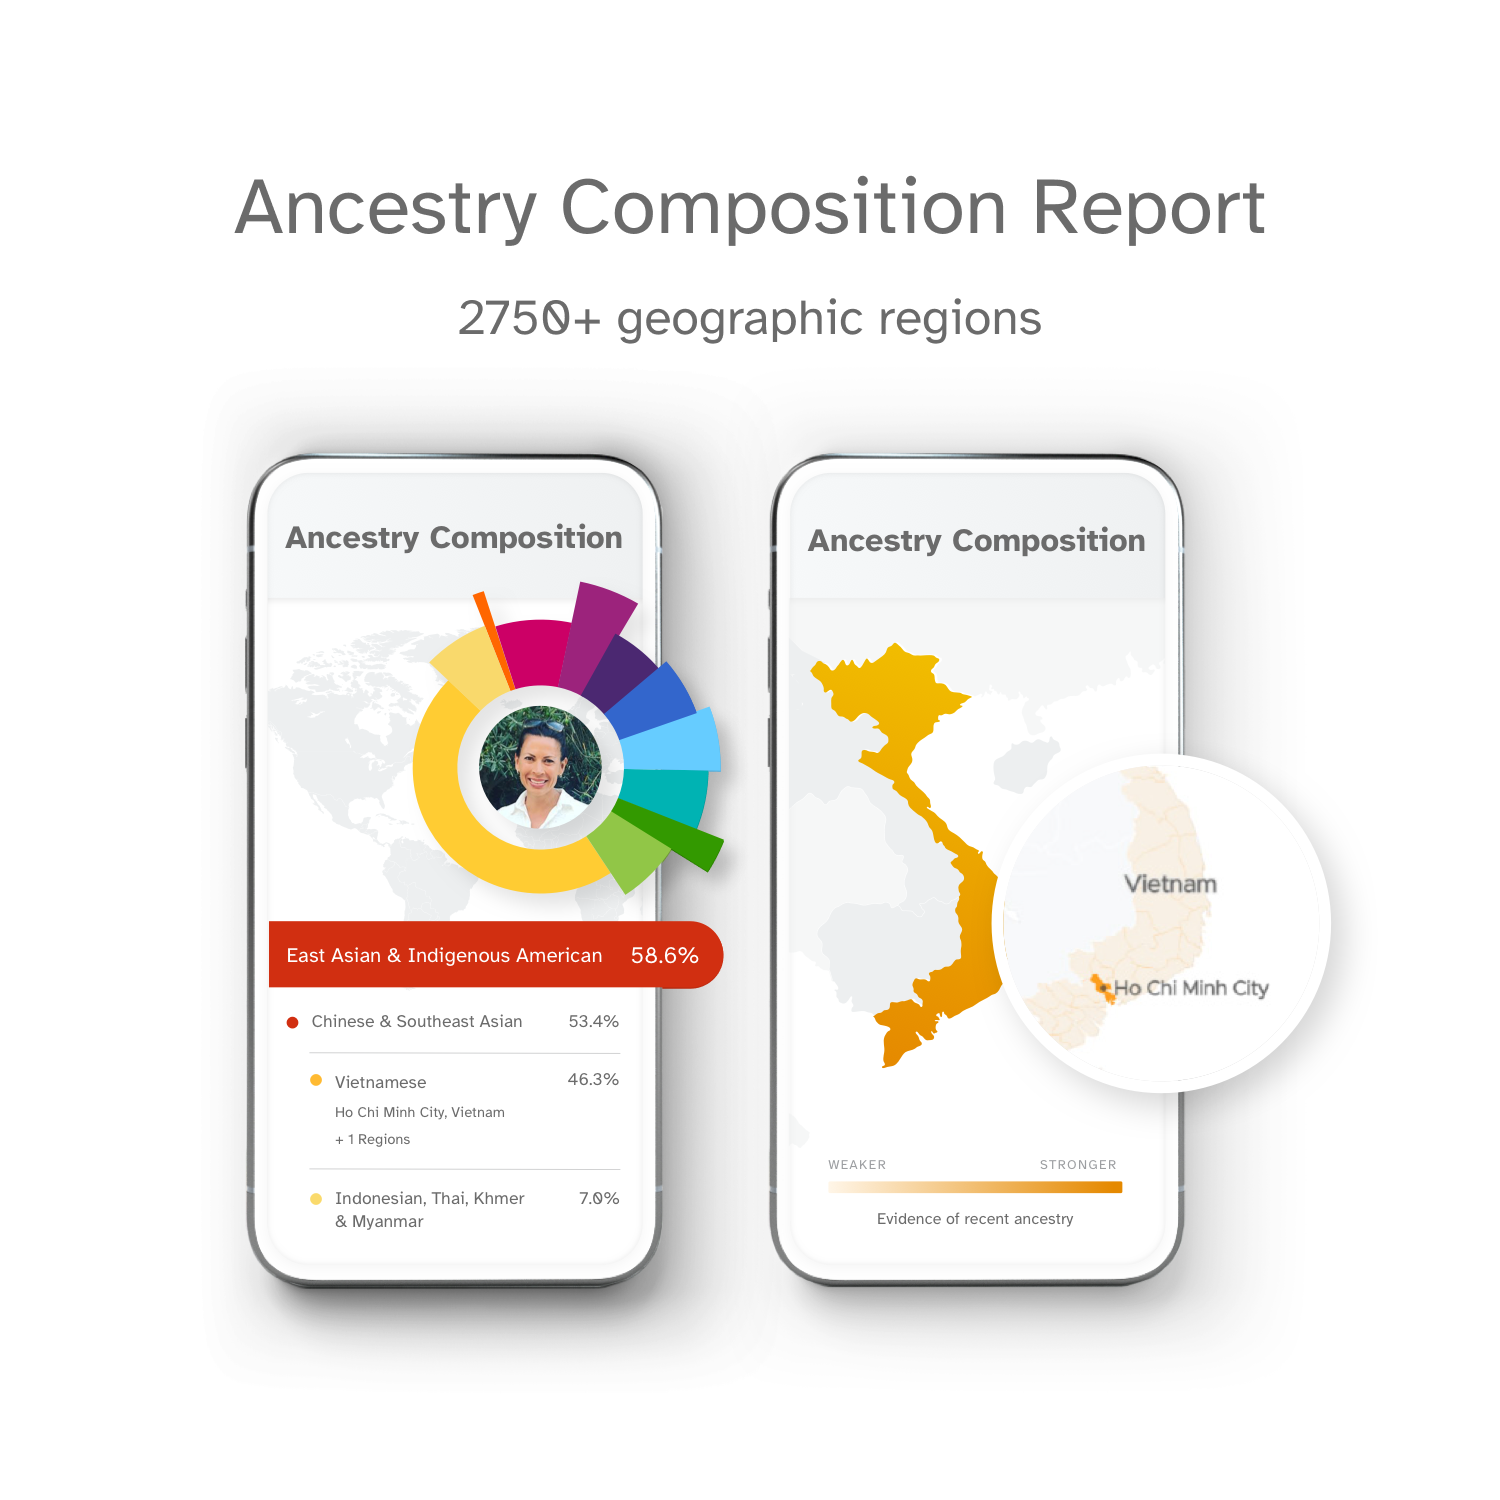 23andMe Ancestry Service - DNA Test Kit with 3000+ Geographic Regions, Family Tree & Trait Reports - image 2 of 8